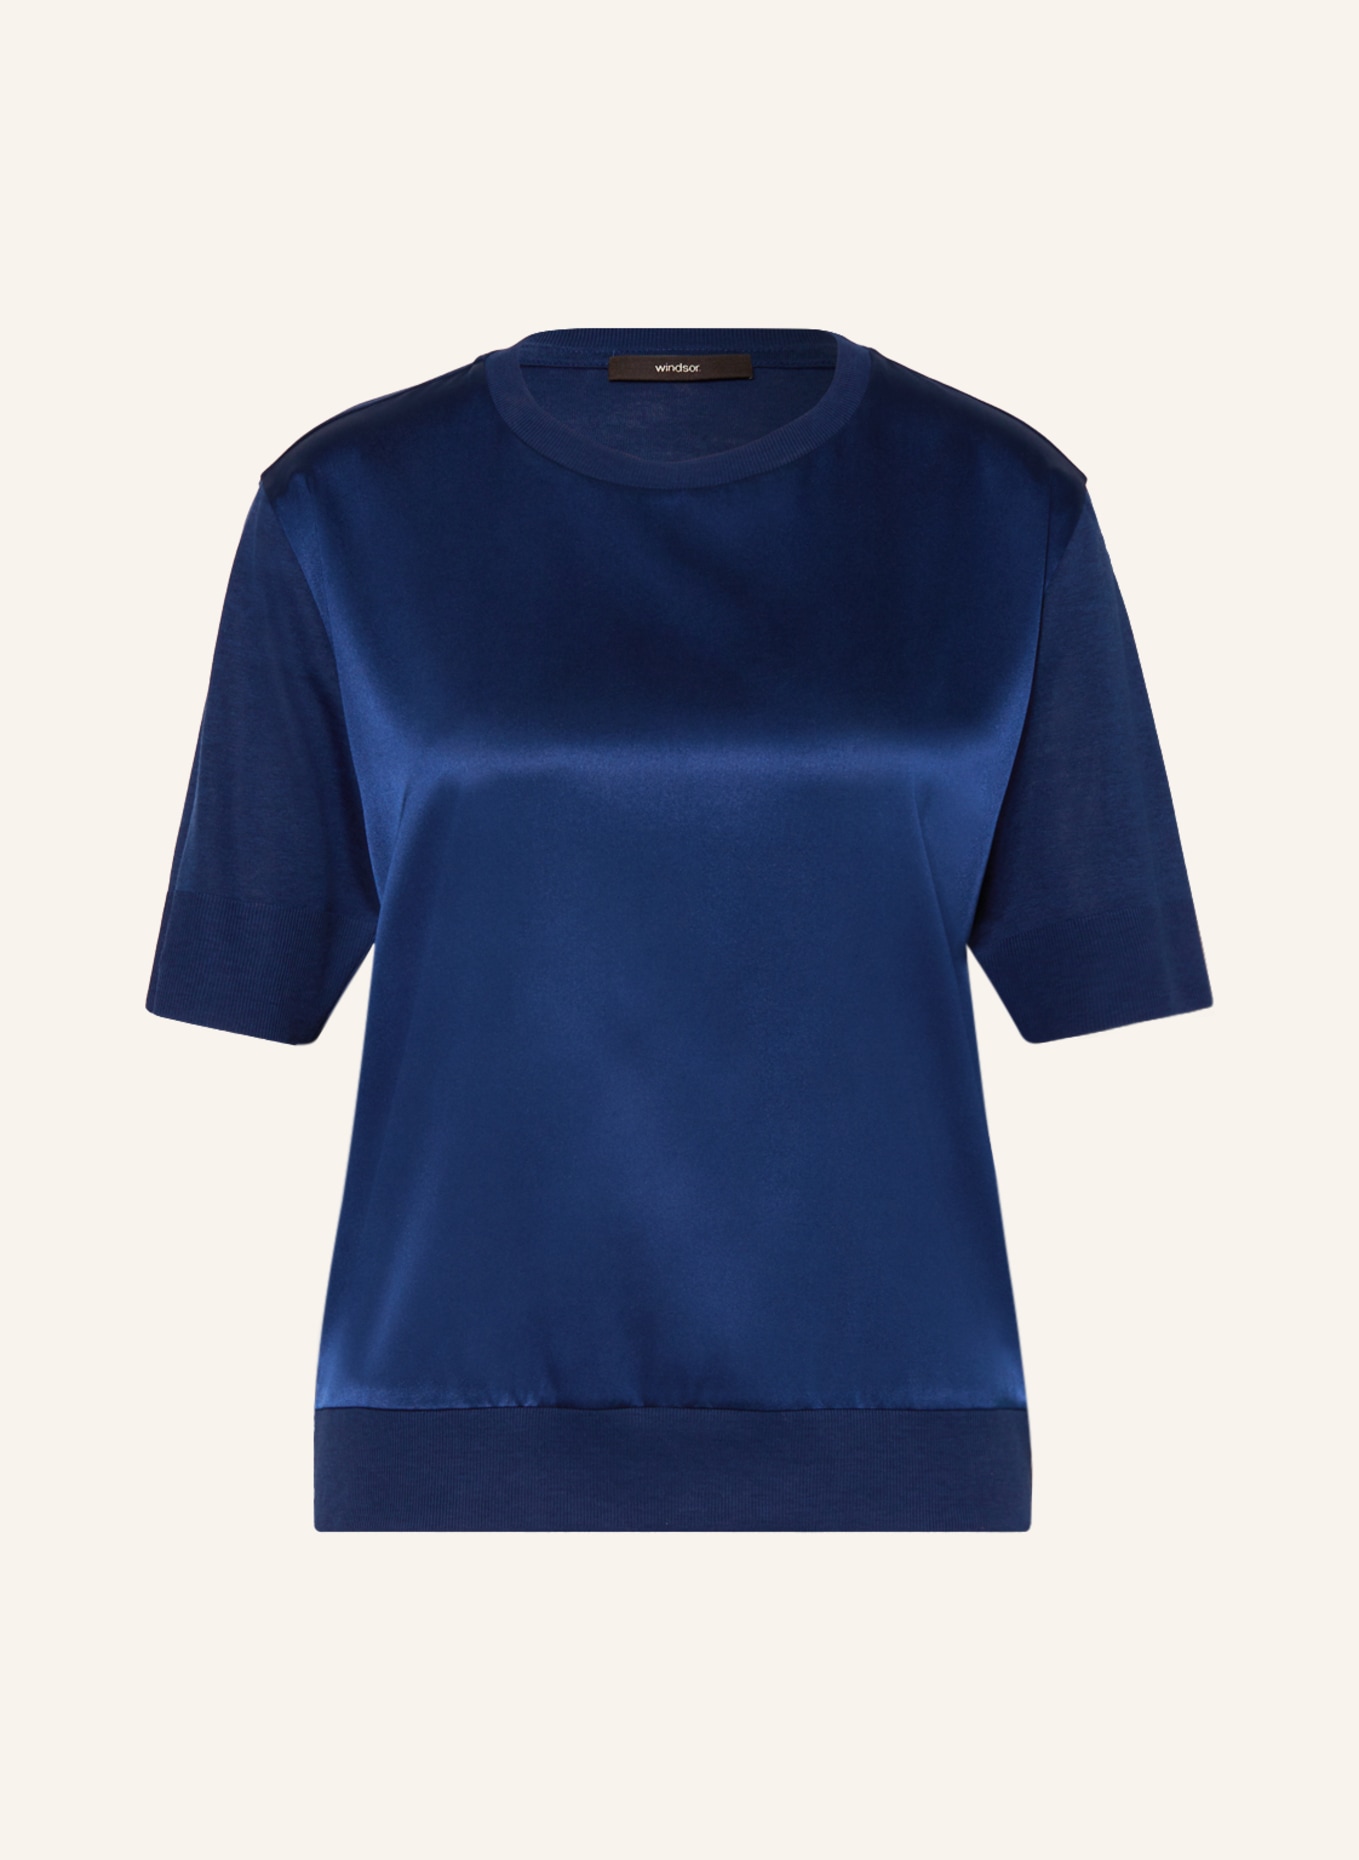 windsor. Shirt blouse in mixed materials, Color: BLUE (Image 1)